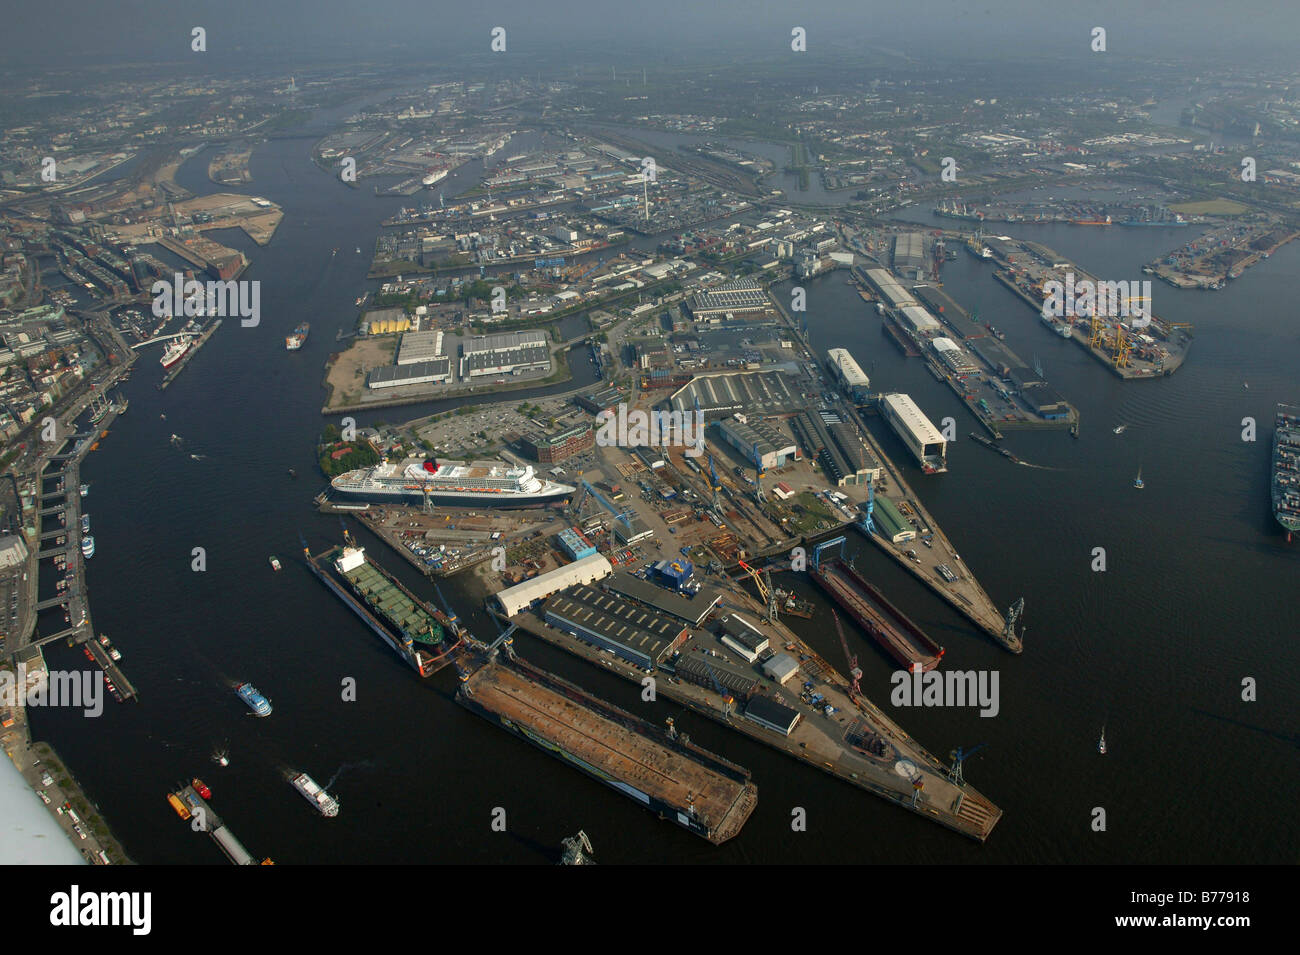 Aerial photograph, drydock Elbe 17, cruise ship, Queen Mary 2 in dock, Outer Alster Lake, Hamburg, Germany, Europe Stock Photo